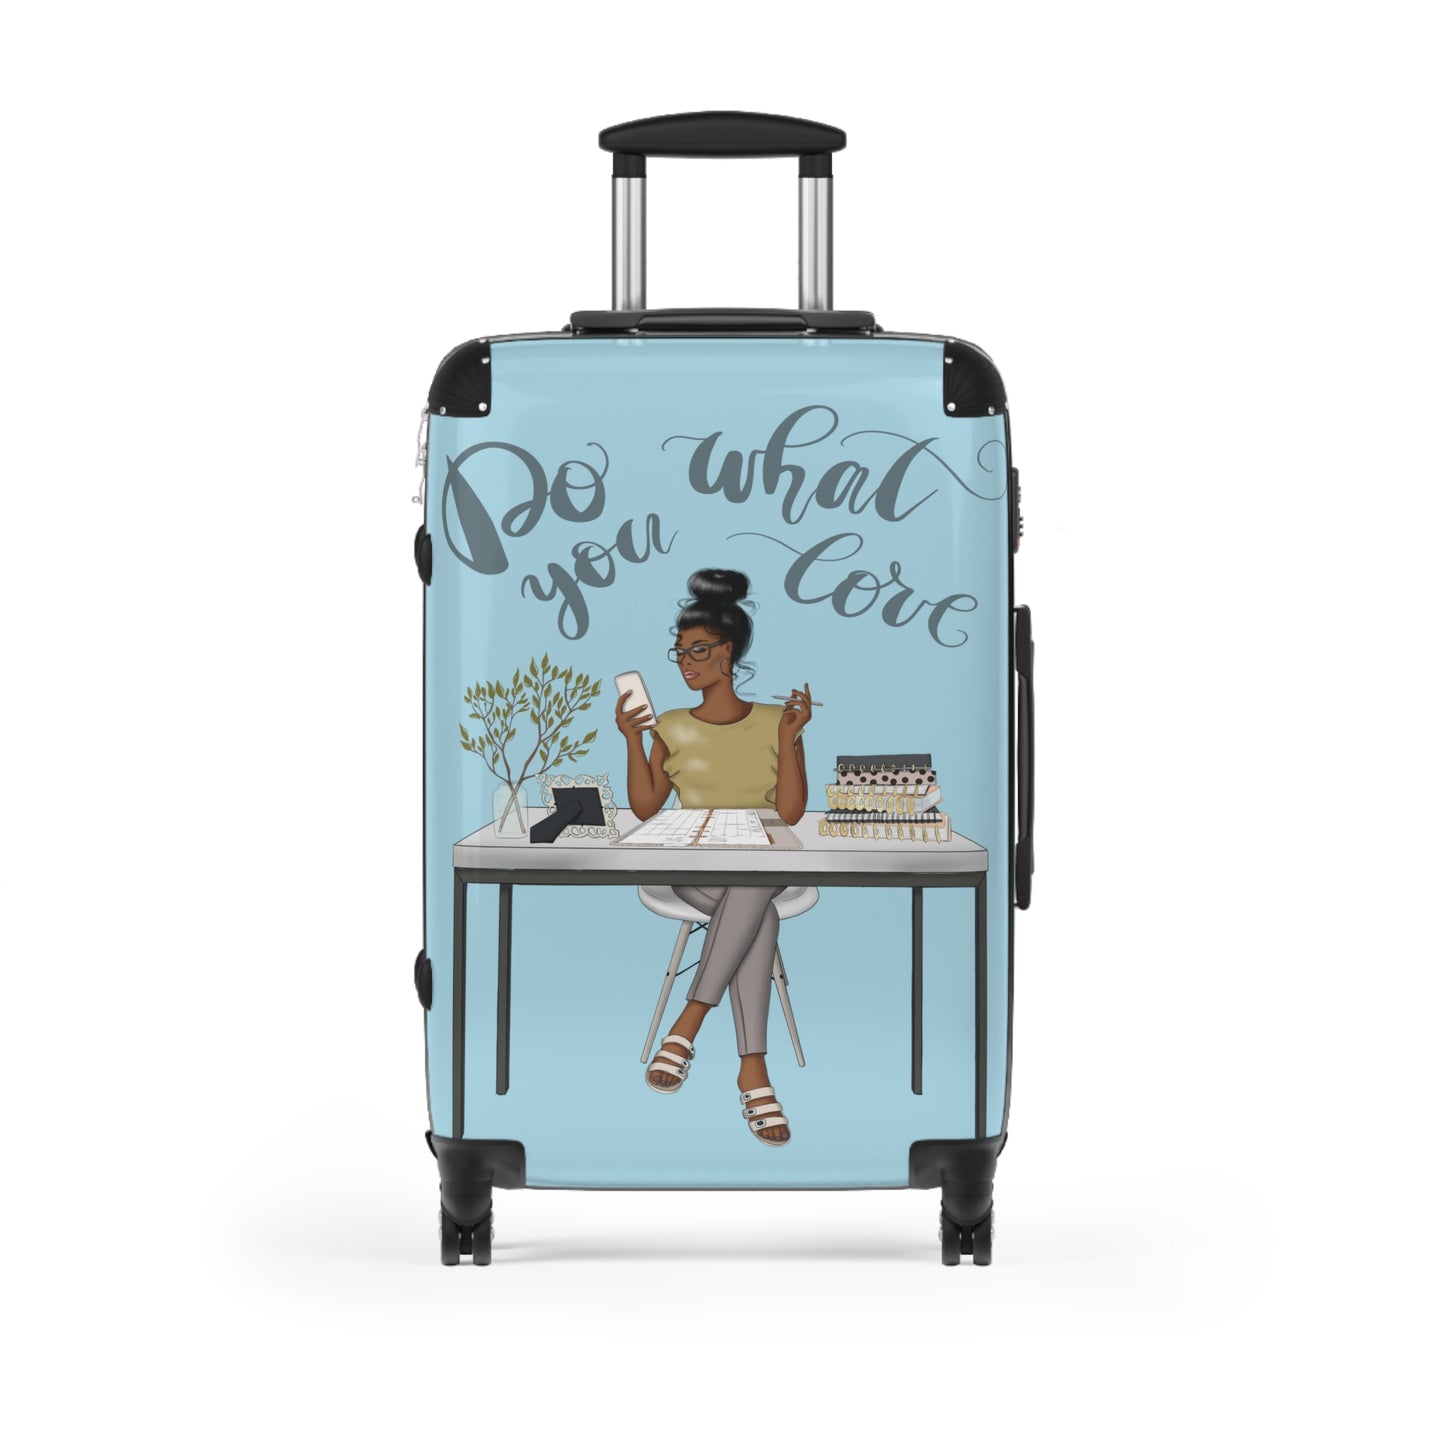 Do What You Love Suitcase - Blue